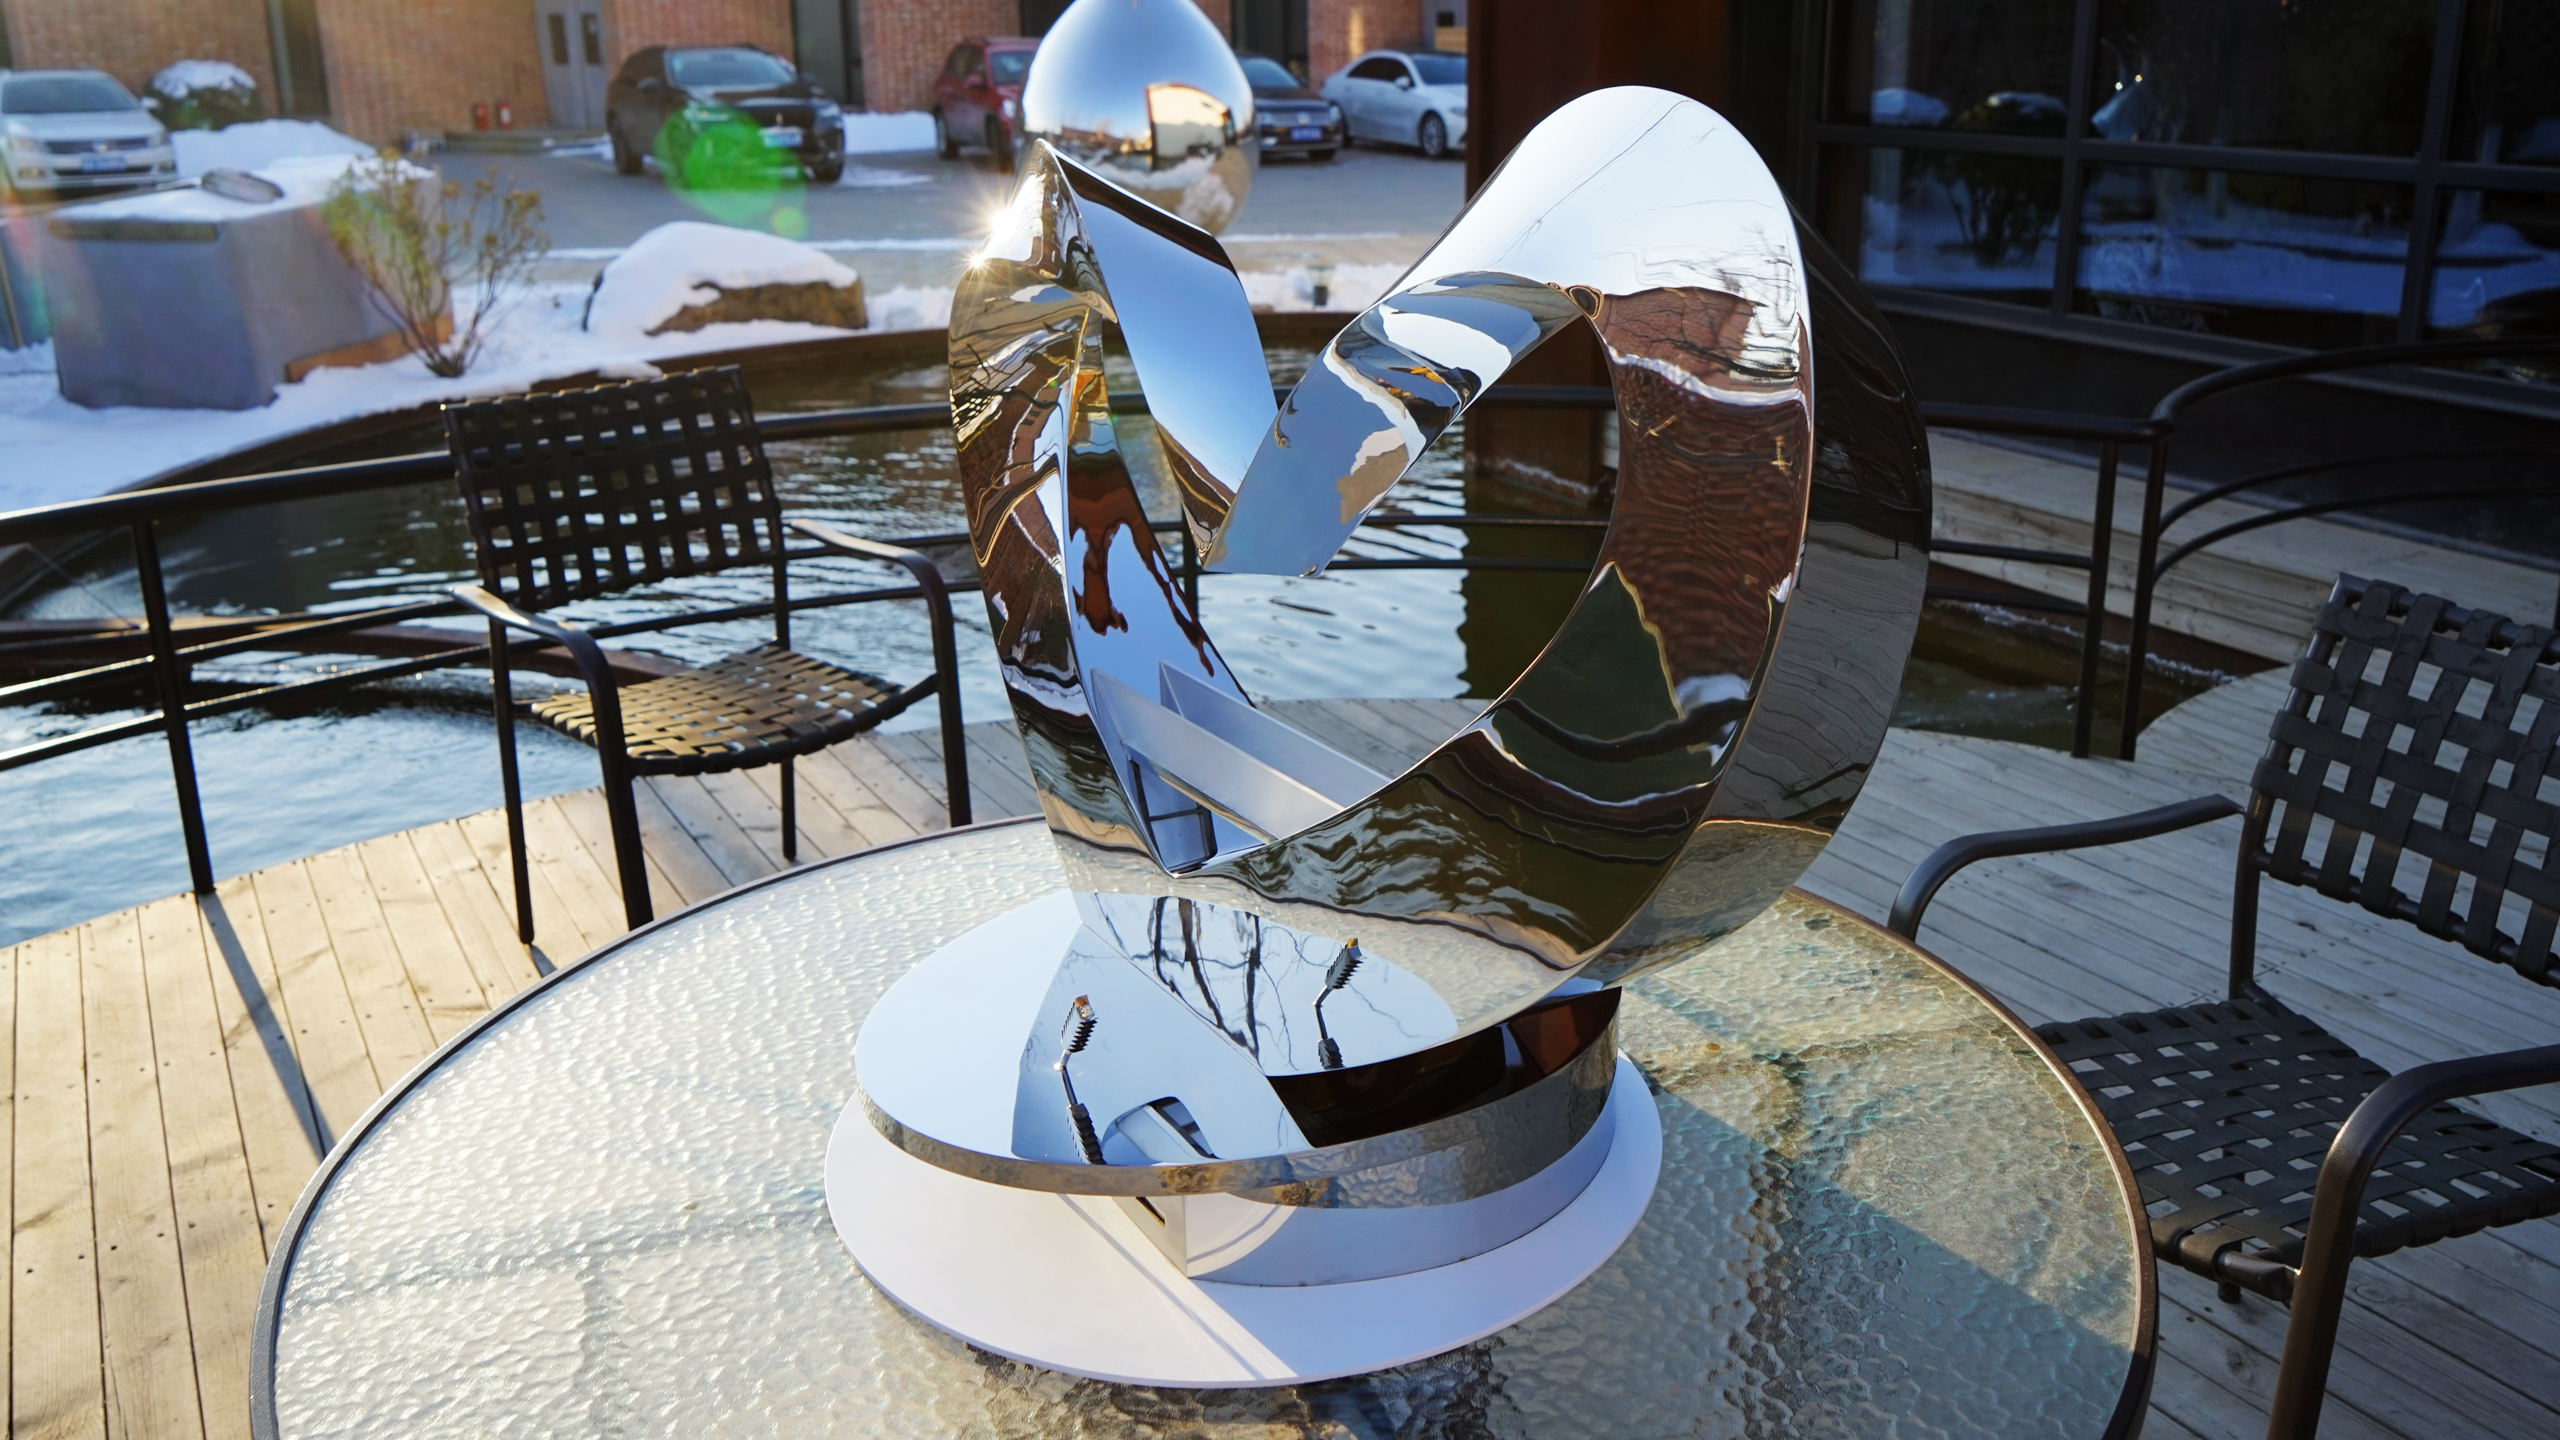 Mirror Polishing Stainless Steel Sculpture-Tradition Heart